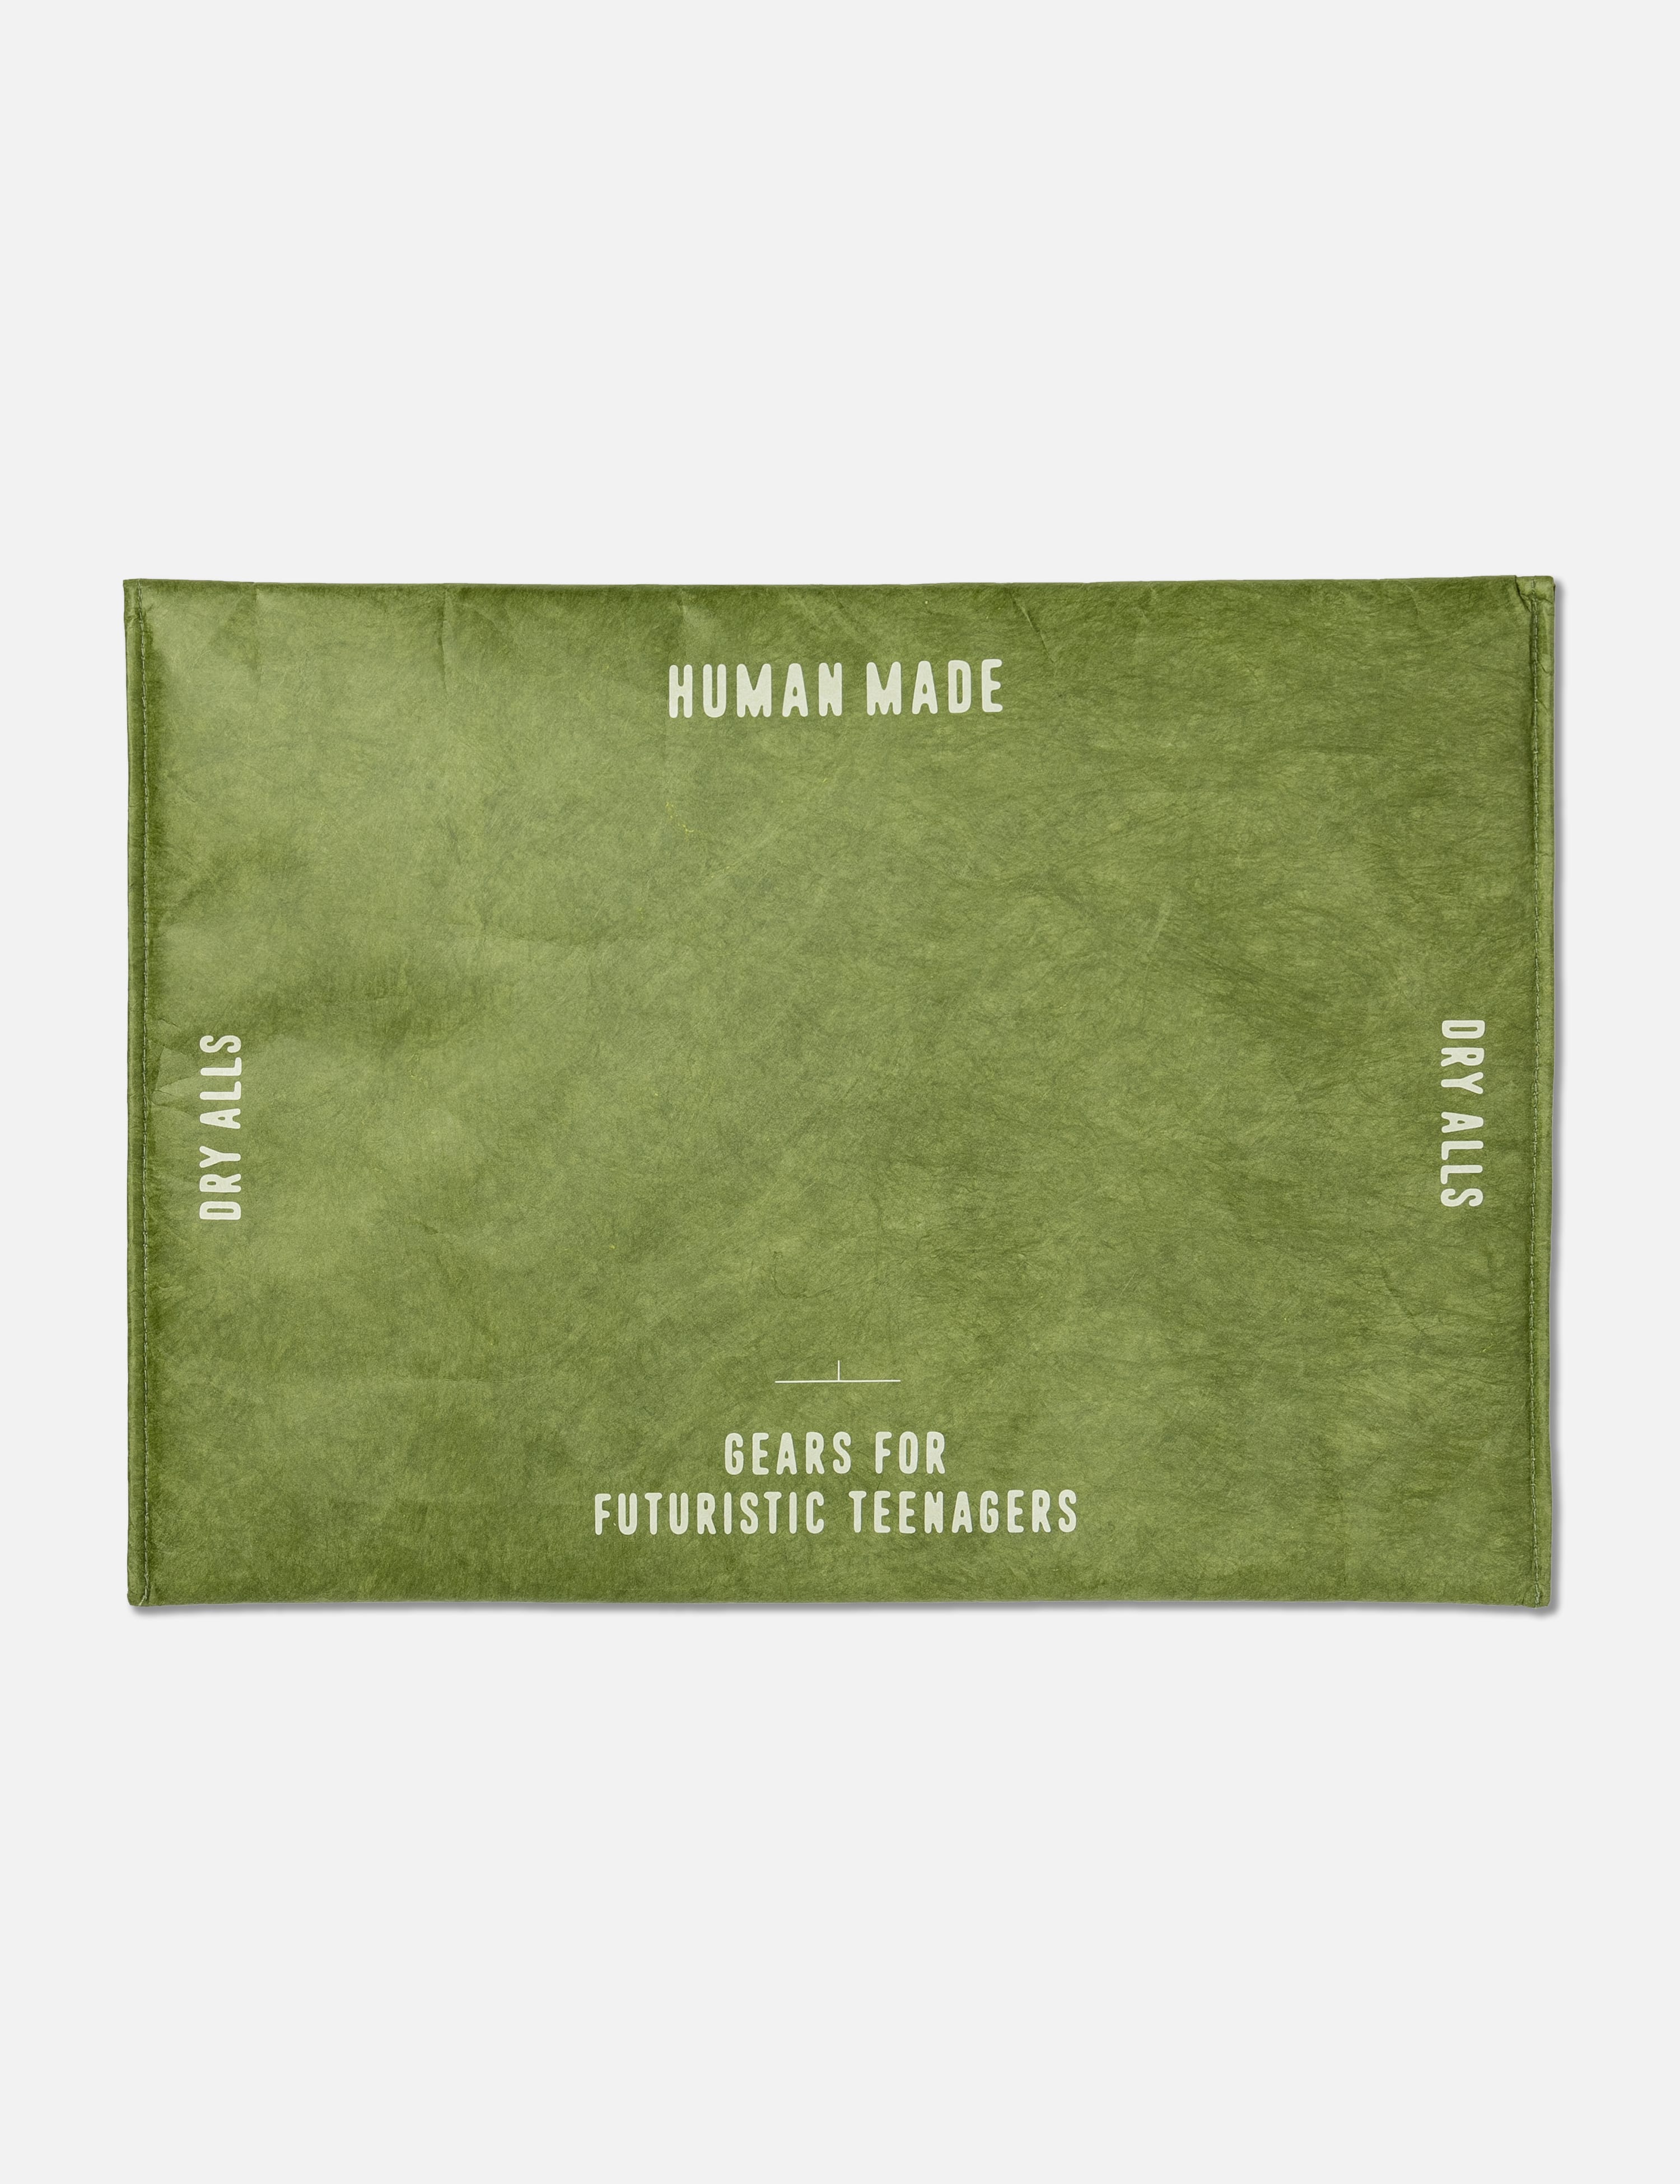 HUMAN MADE PC/TABLET SLEEVE 16INCH